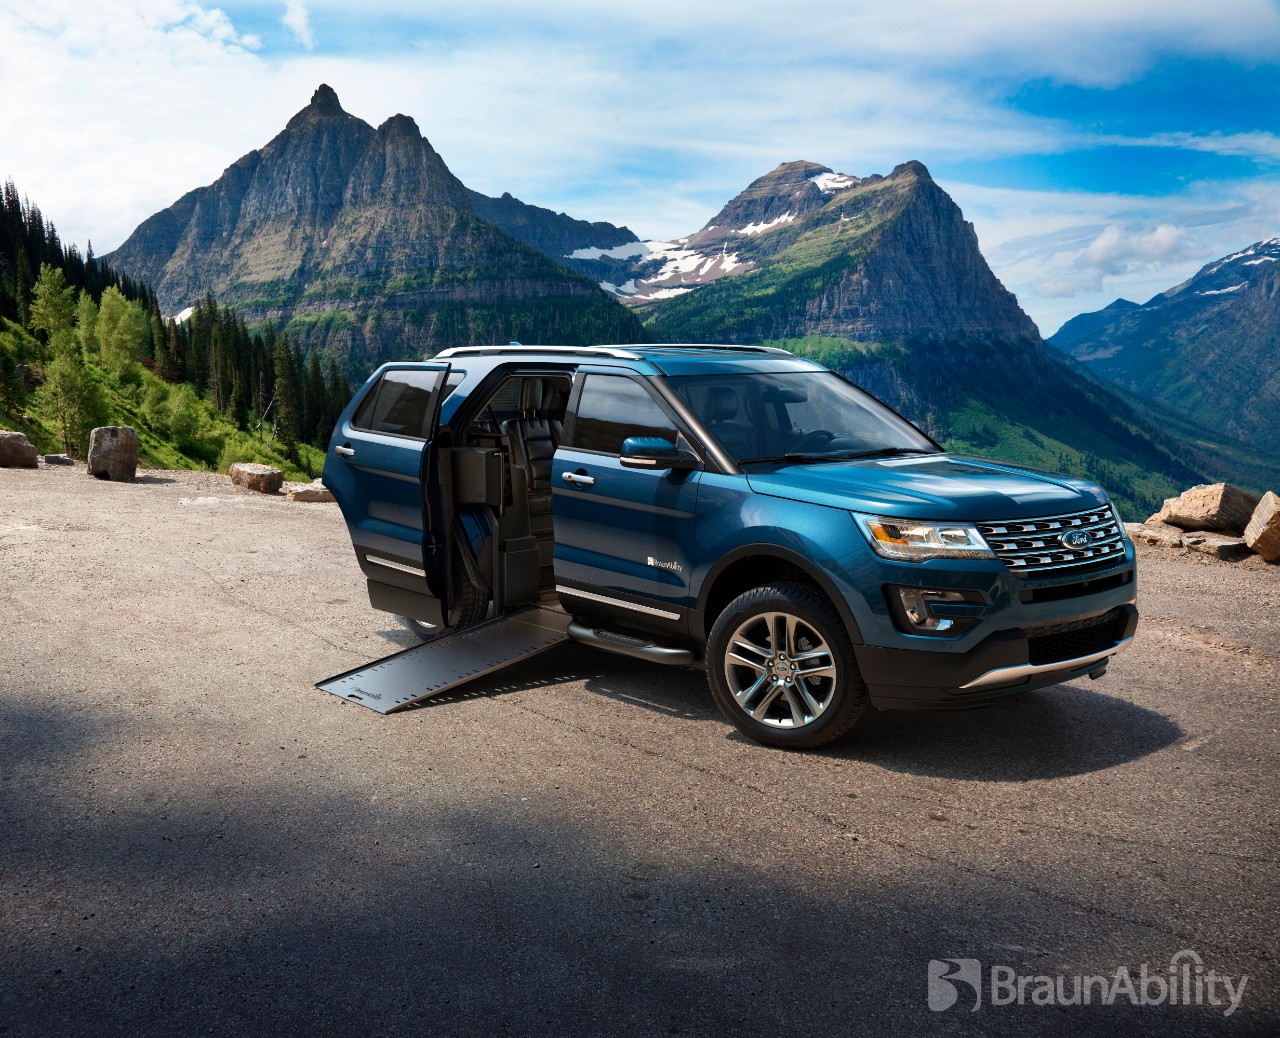 2016 Ford Explorer to Become First-Ever Wheelchair-Accessible SUV